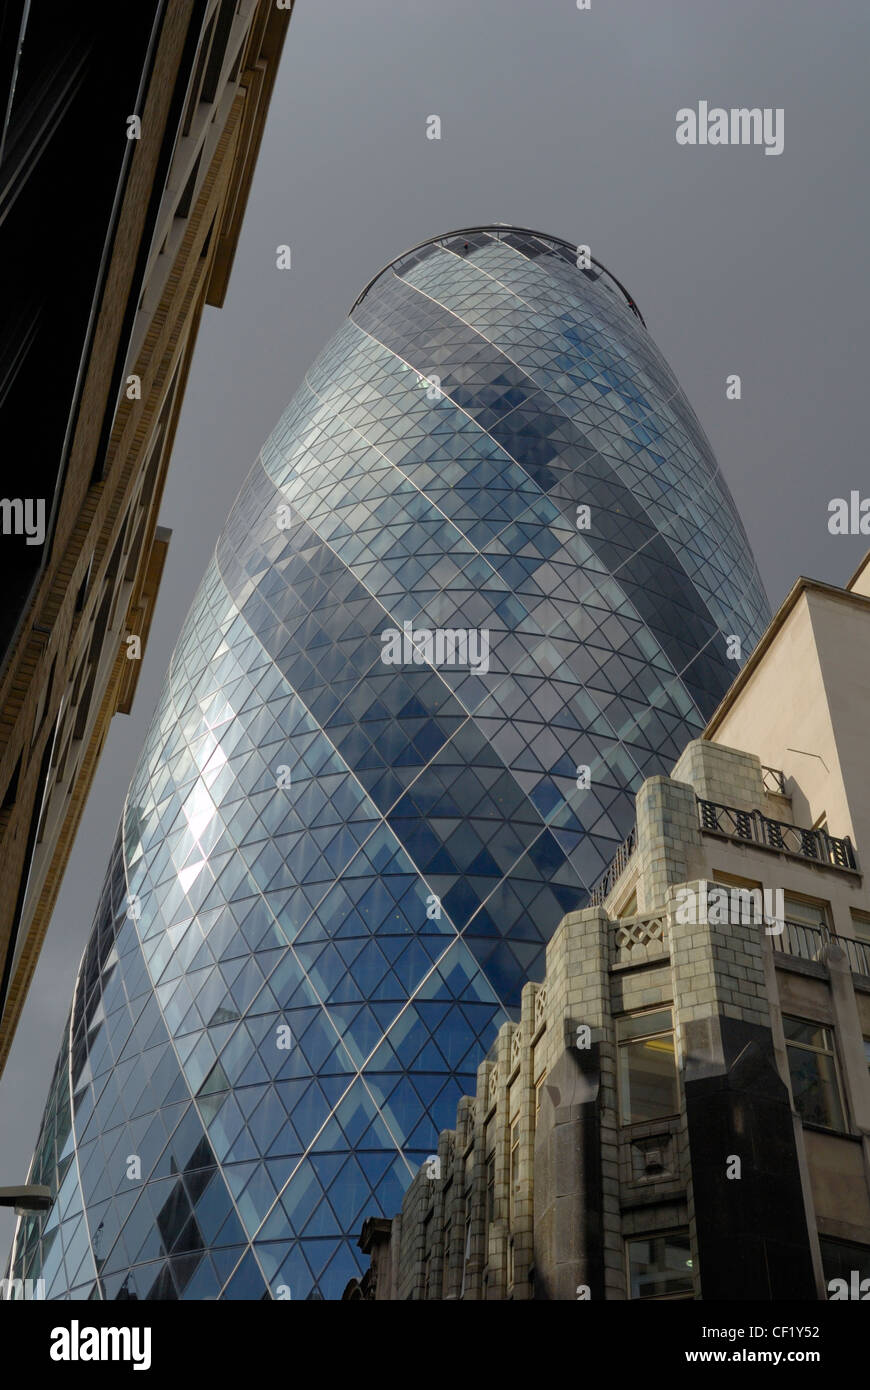 30 St Mary Axe, also known as the Gherkin, the second tallest building in the City of London. Stock Photo